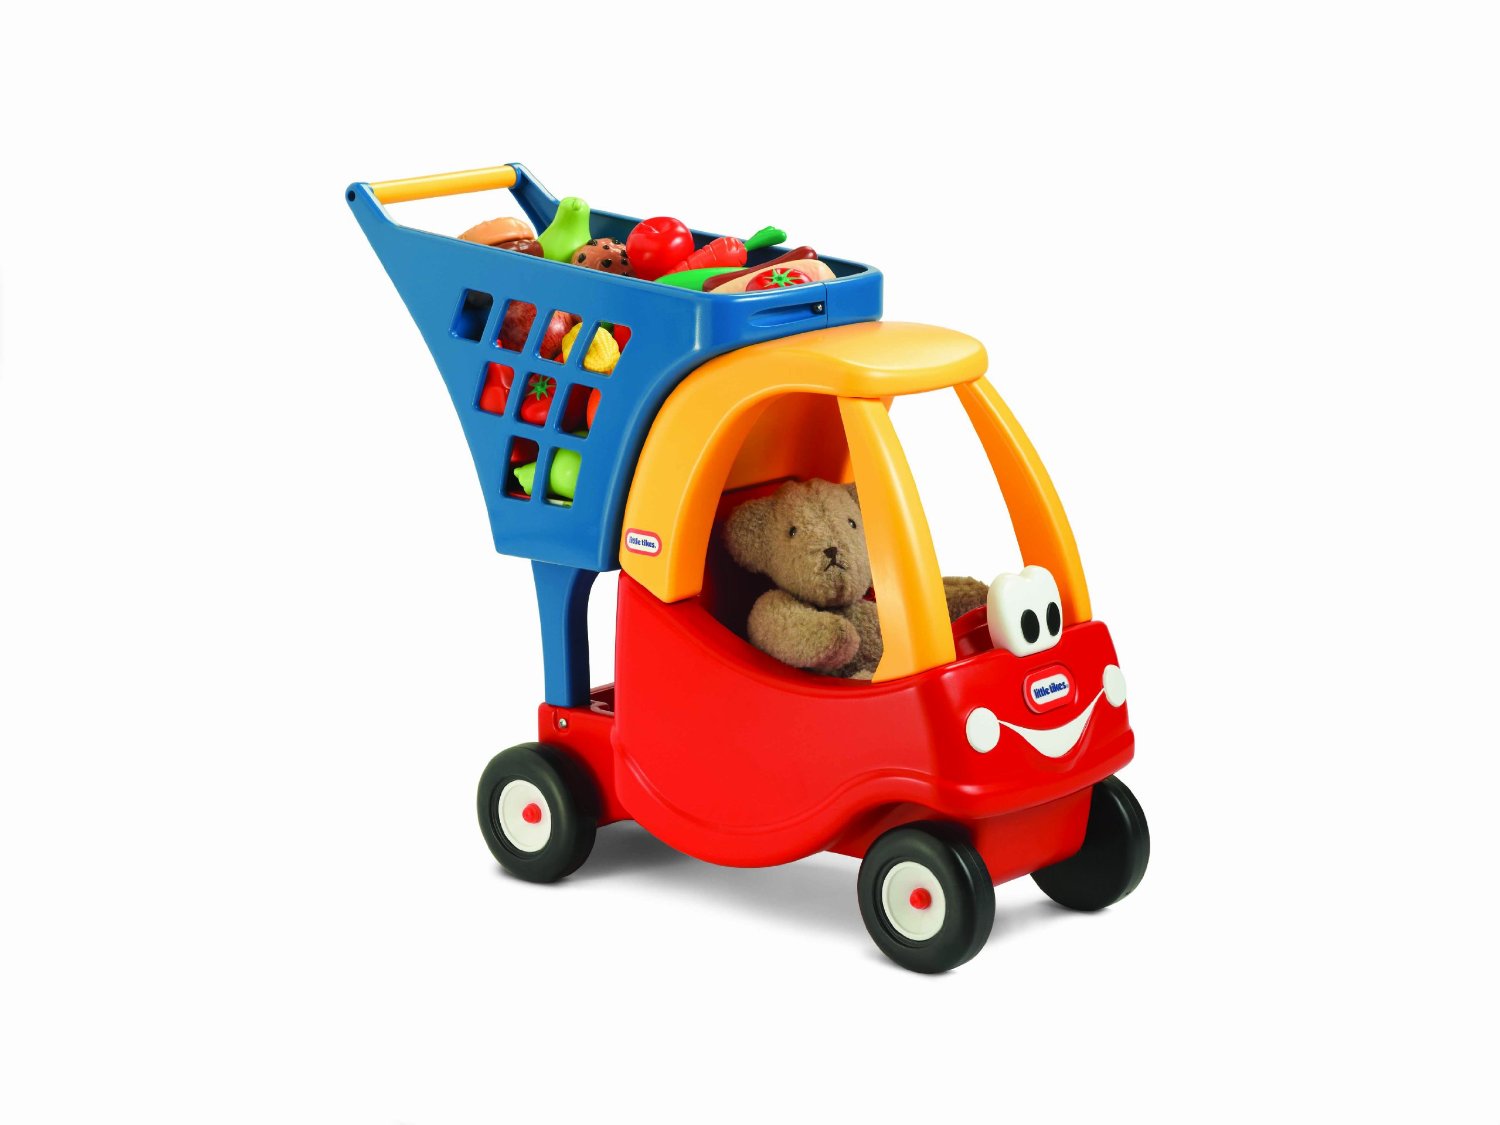 Little Tikes Cozy Shopping Cart in Red/Yellow – Just $26.99!